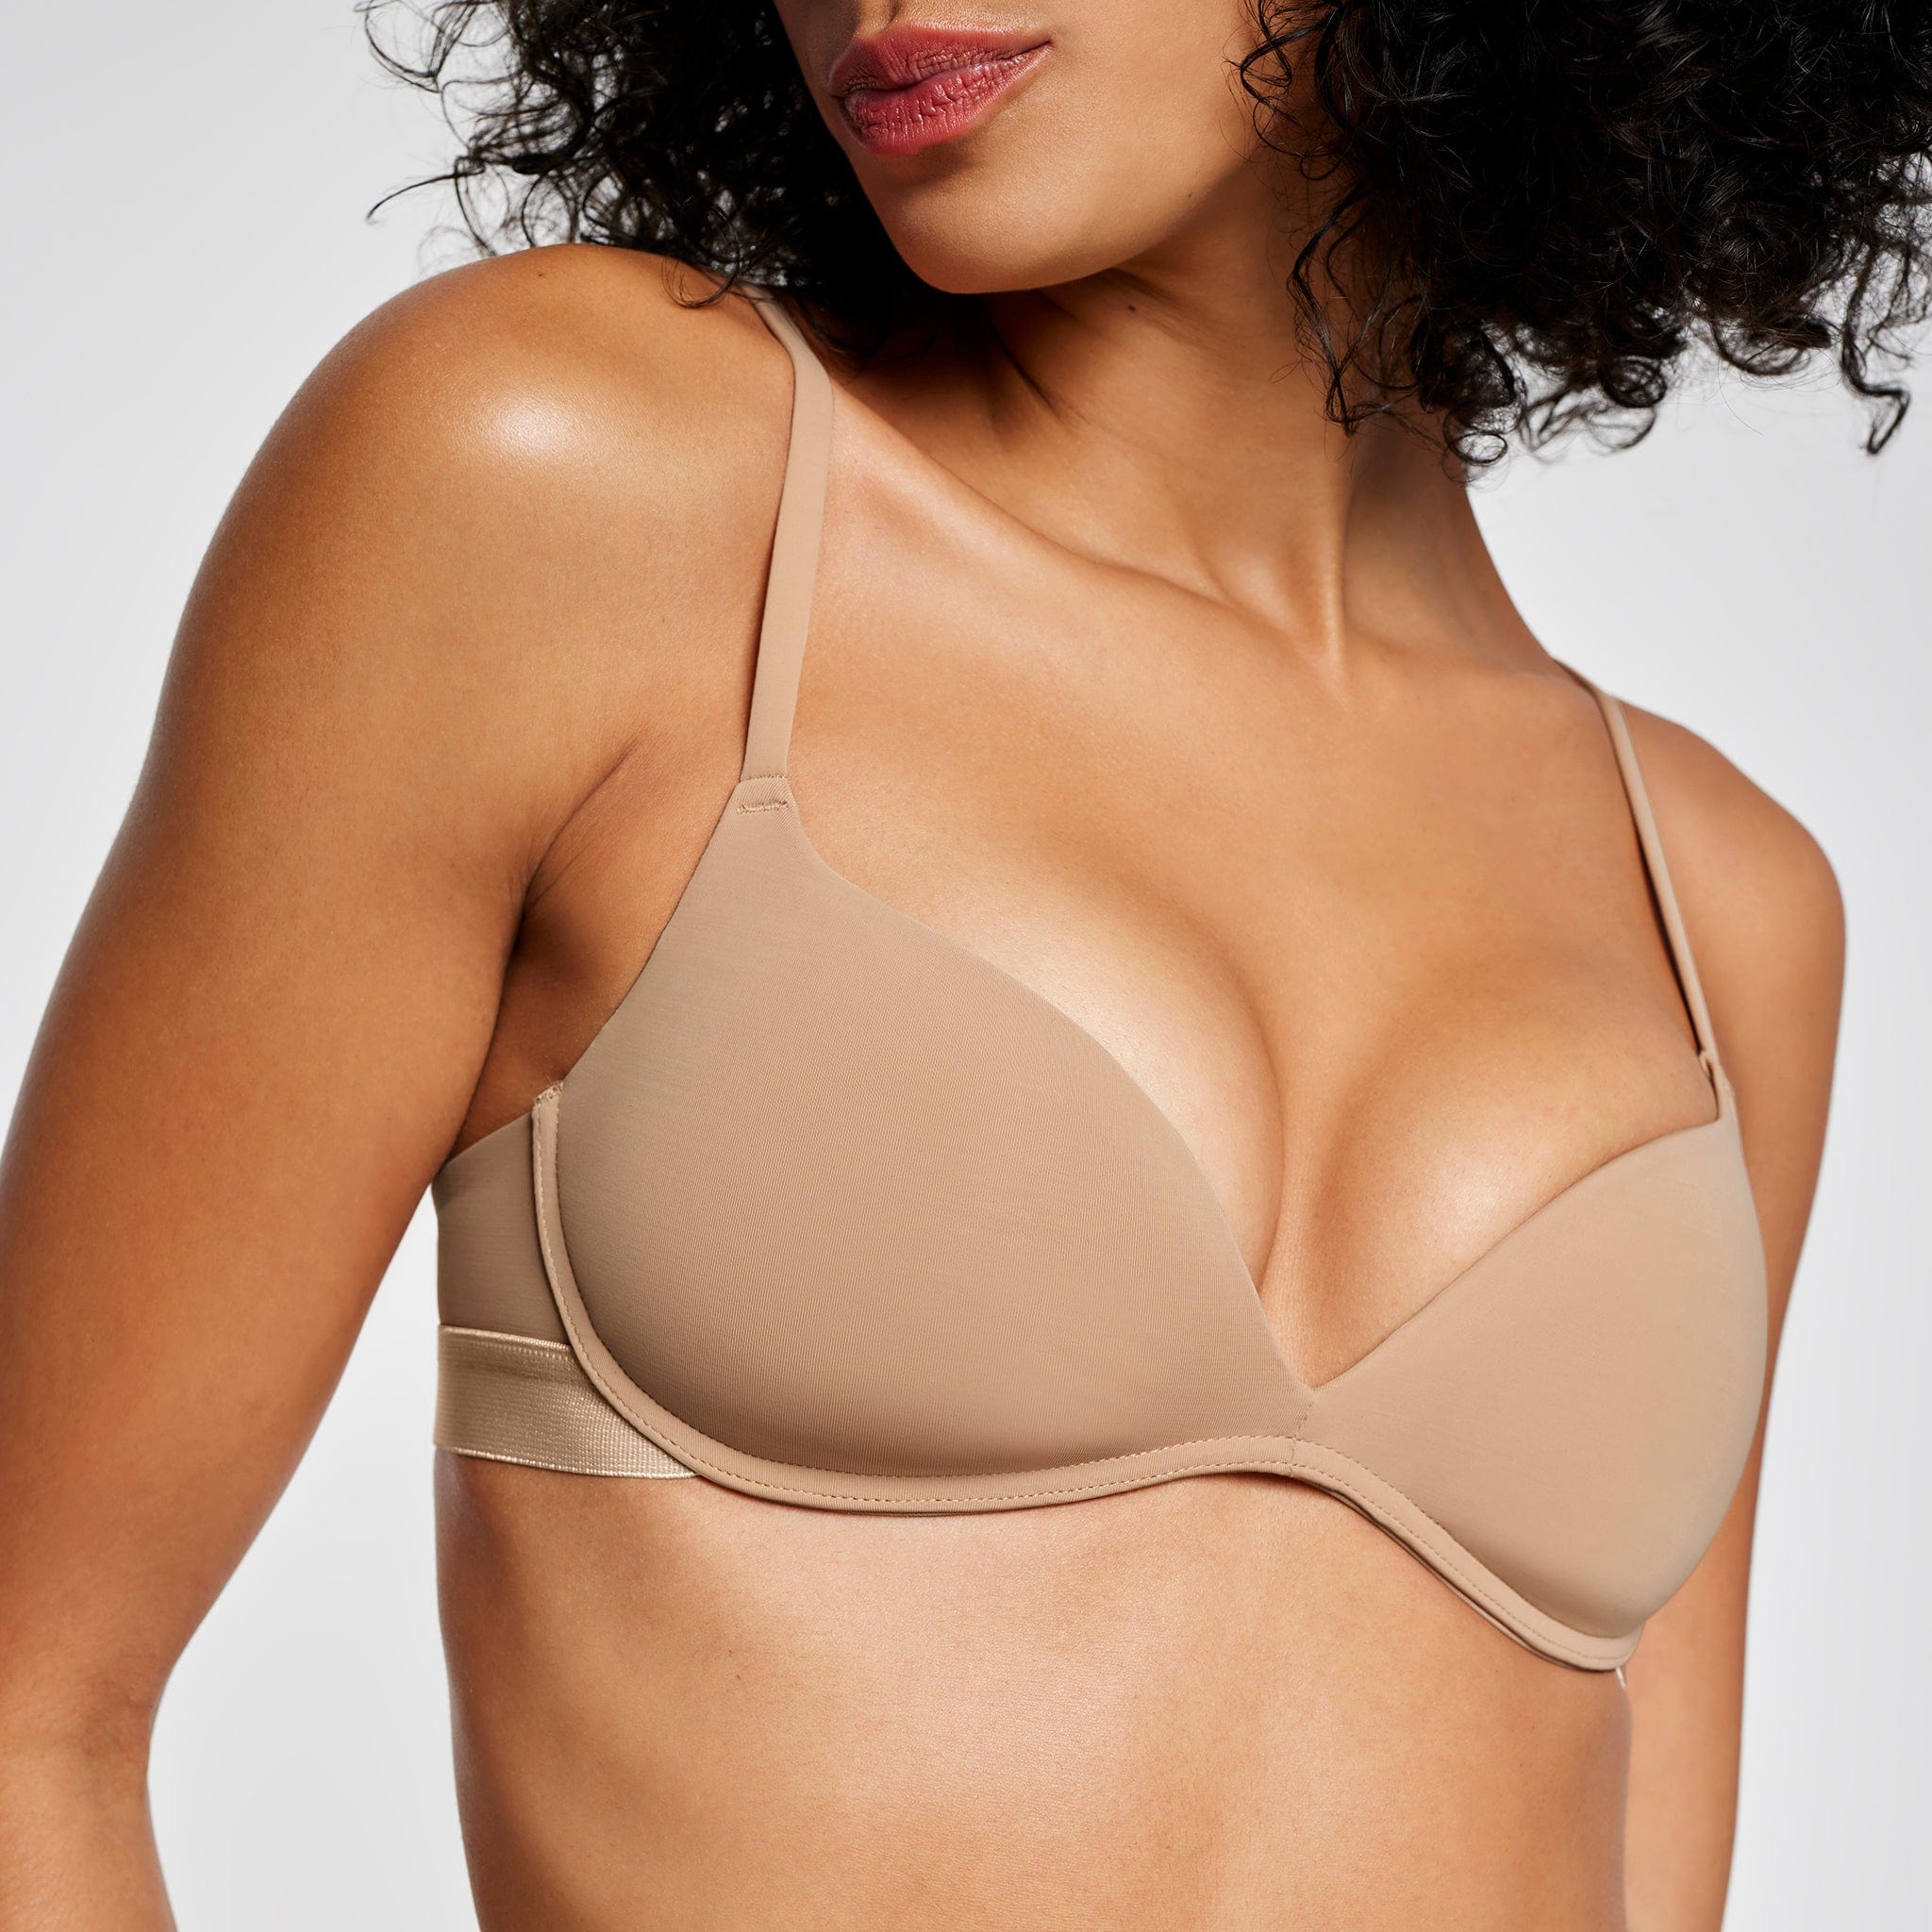 Cotton On Body Ultimate Comfort Push Up2 Bra Beige - Onceit